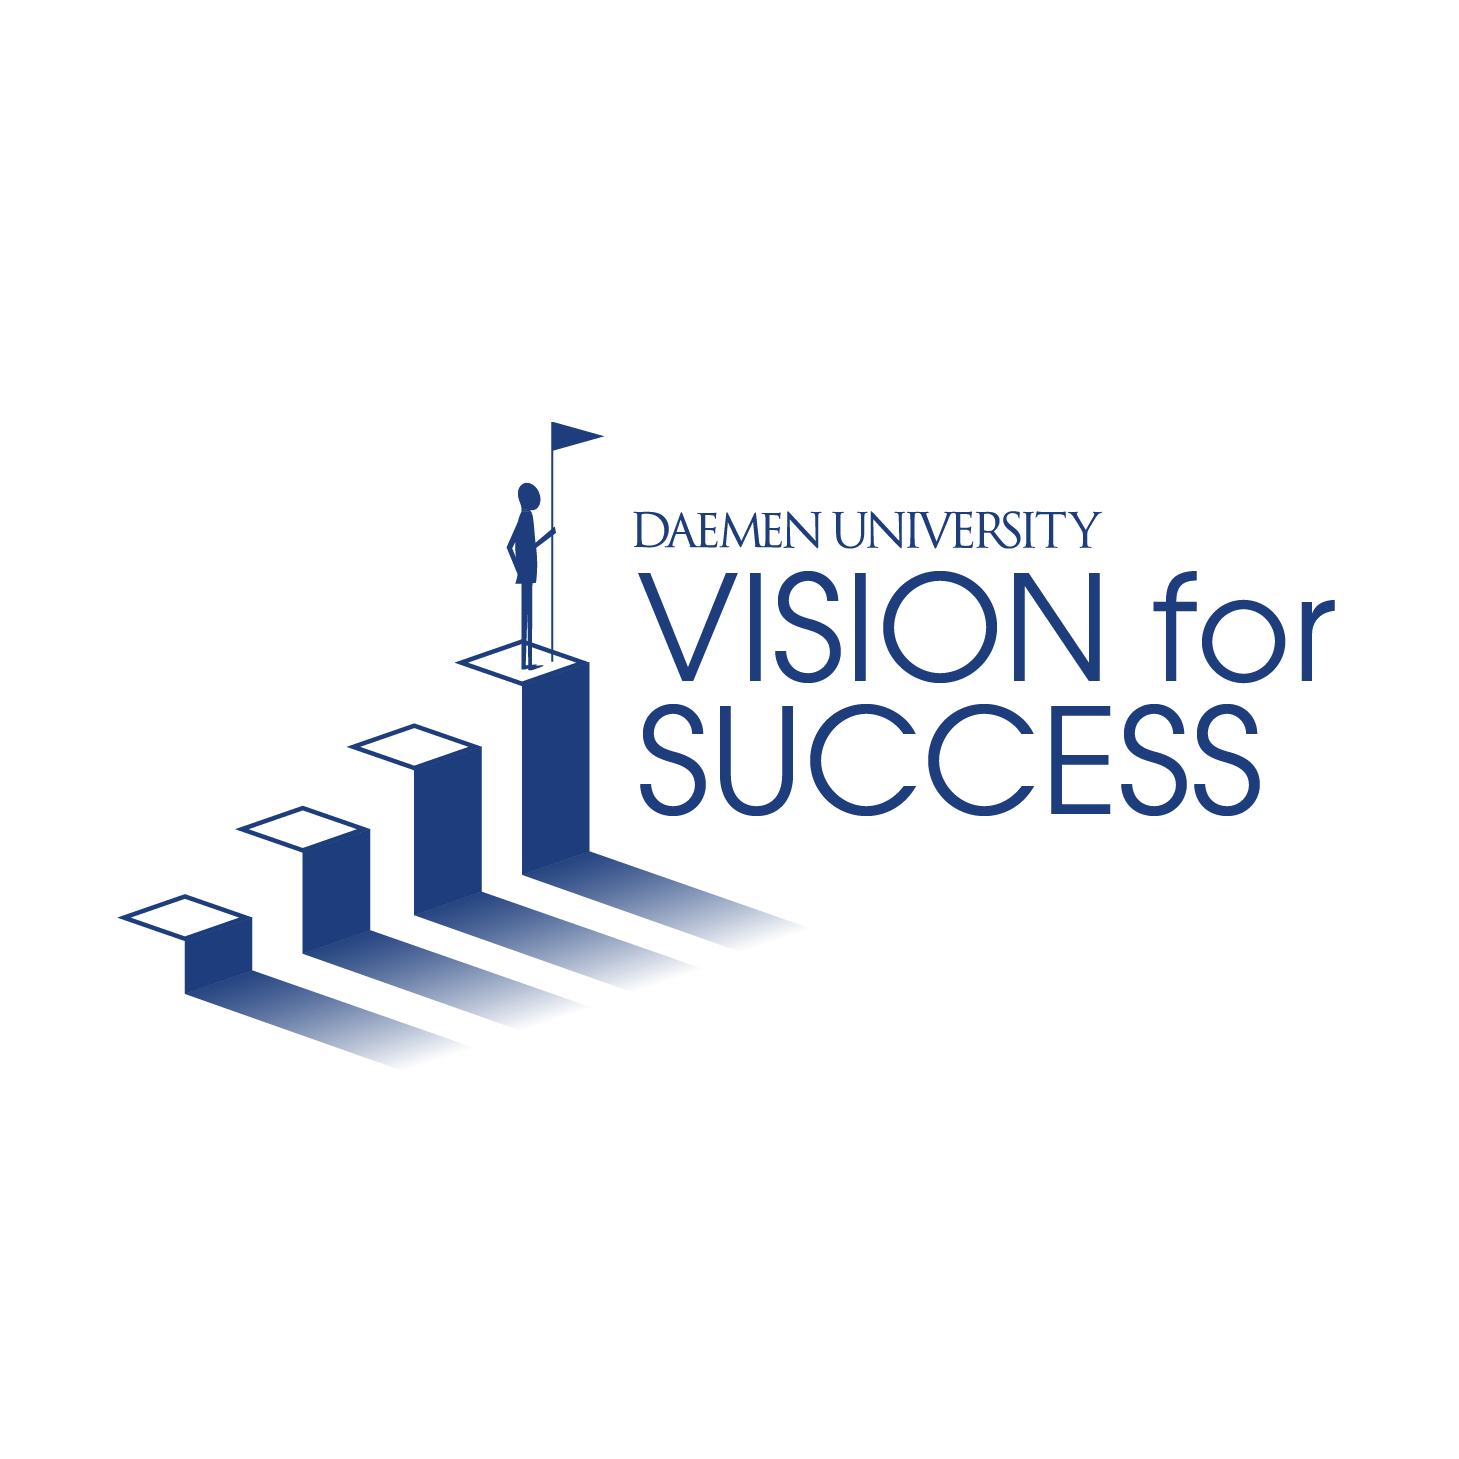 Daemen University Vision For Success blue stairs with person-like image a top holding flag